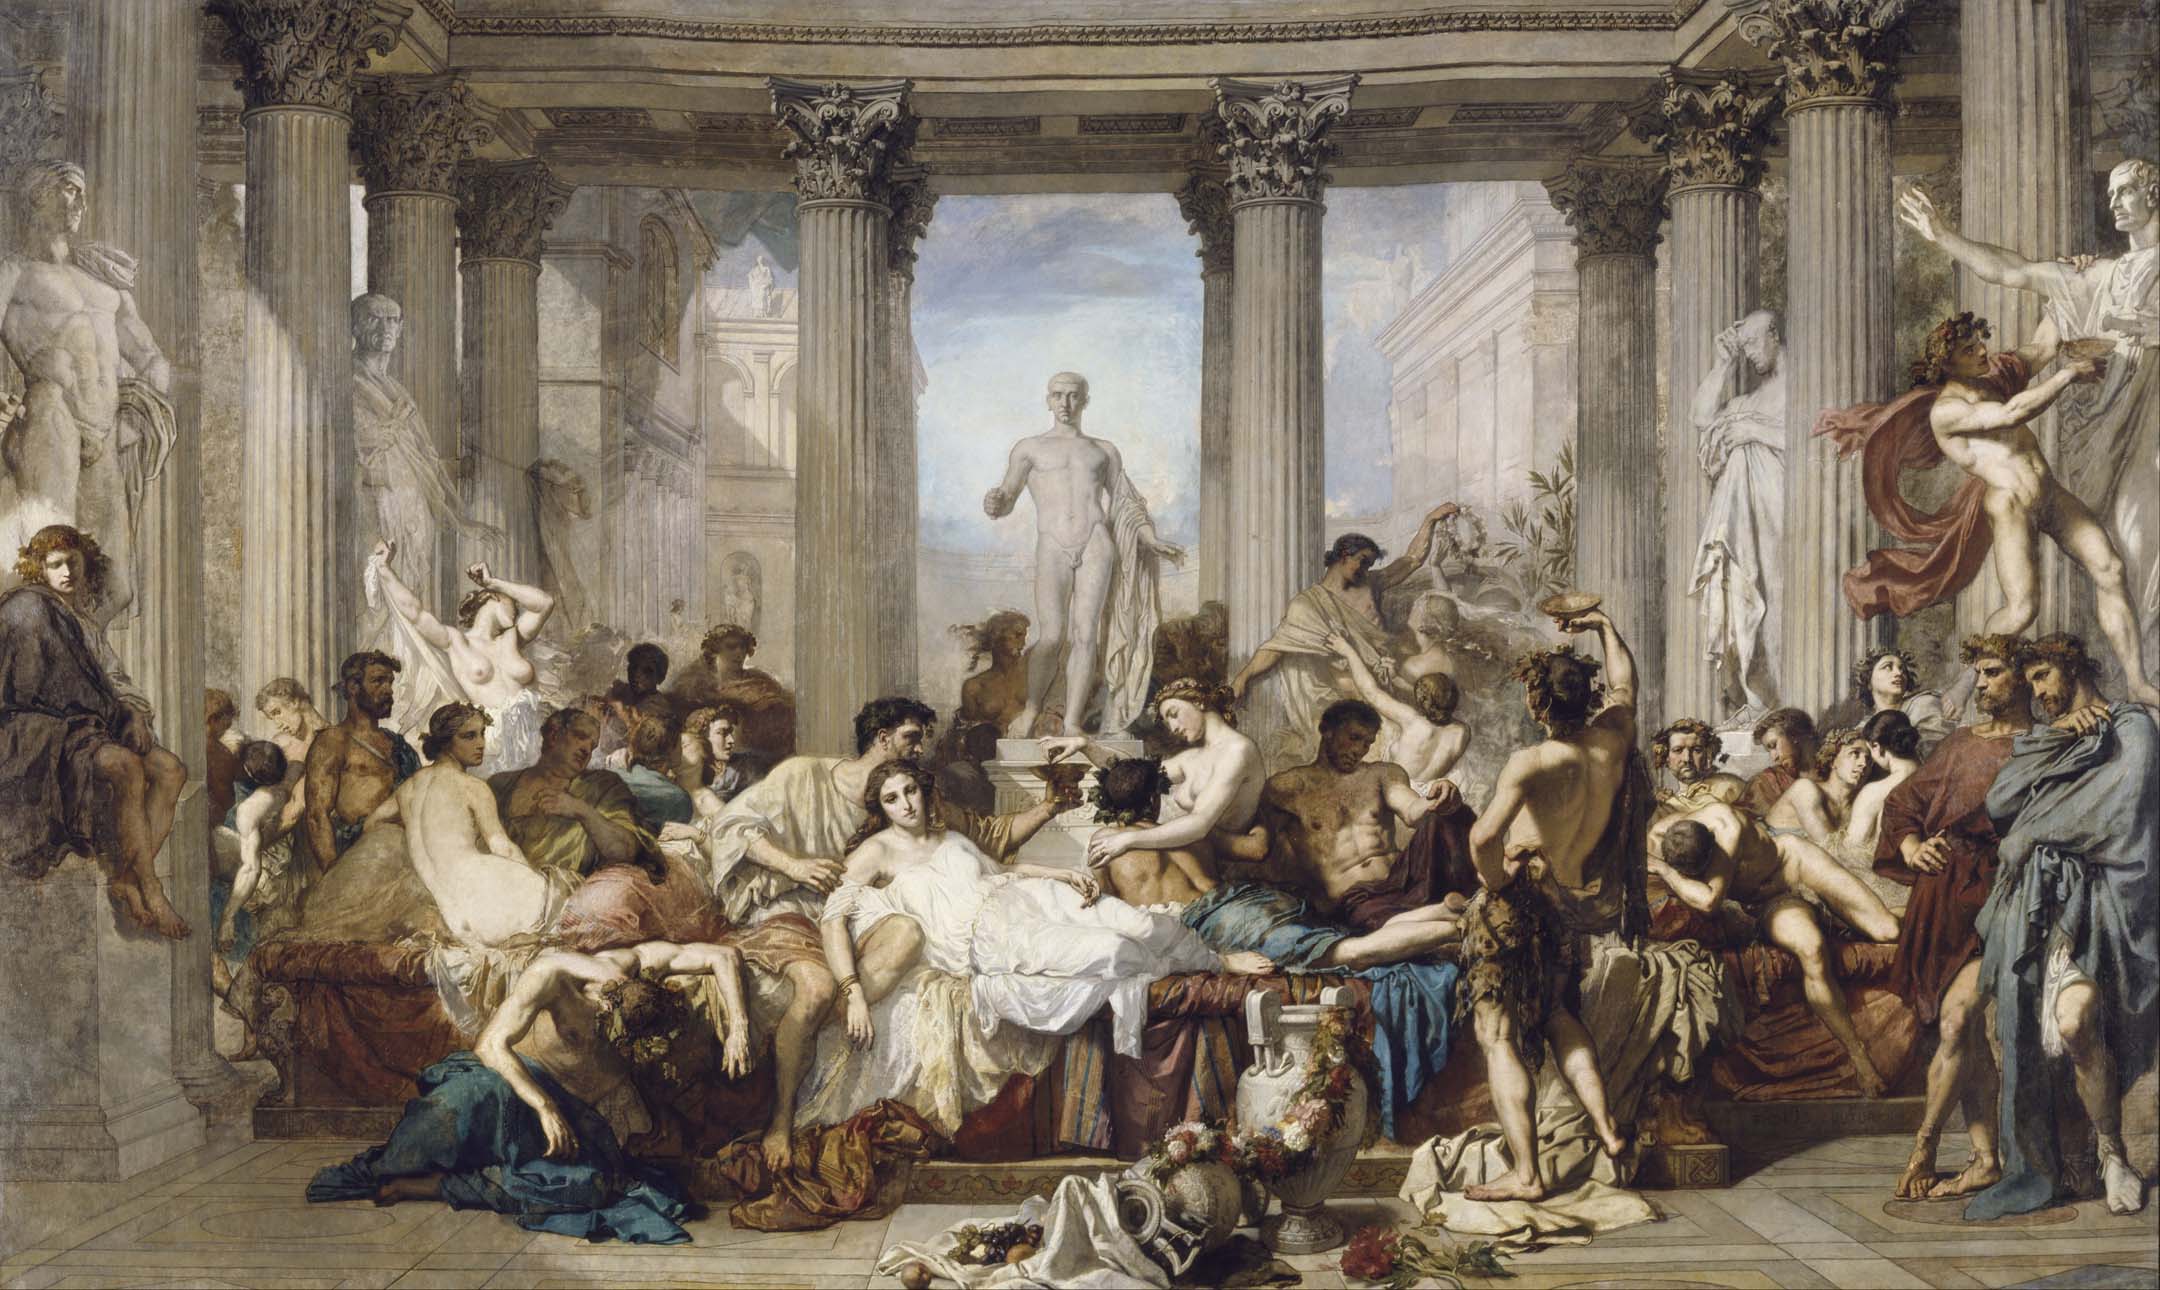  The wealthy Roman aristocrats, having appropriated much of the wealth of the Empire, live in decadent, luxurious paradise. [21]